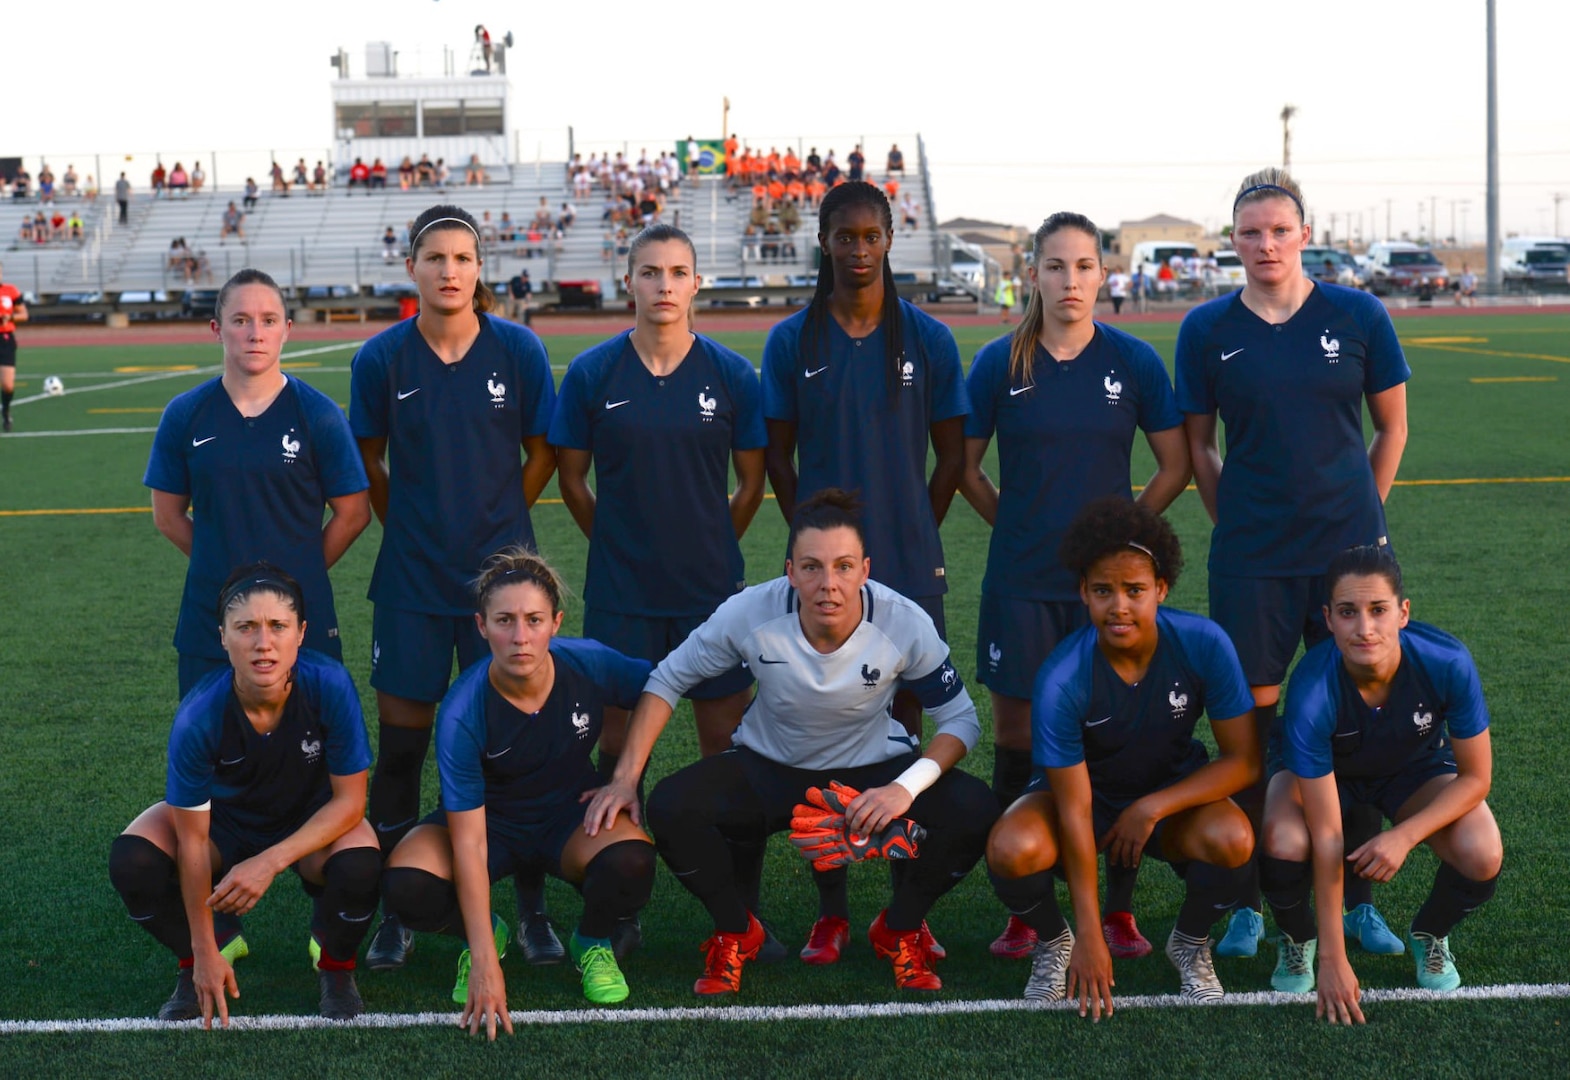 Team France as they get ready for action in the 2018 Conseil International du Sport Militaire (CISM) World Women's Football Championship on 25 June at Fort Bliss, Texas.  (Photo by PO2 Camille Miller, Released)